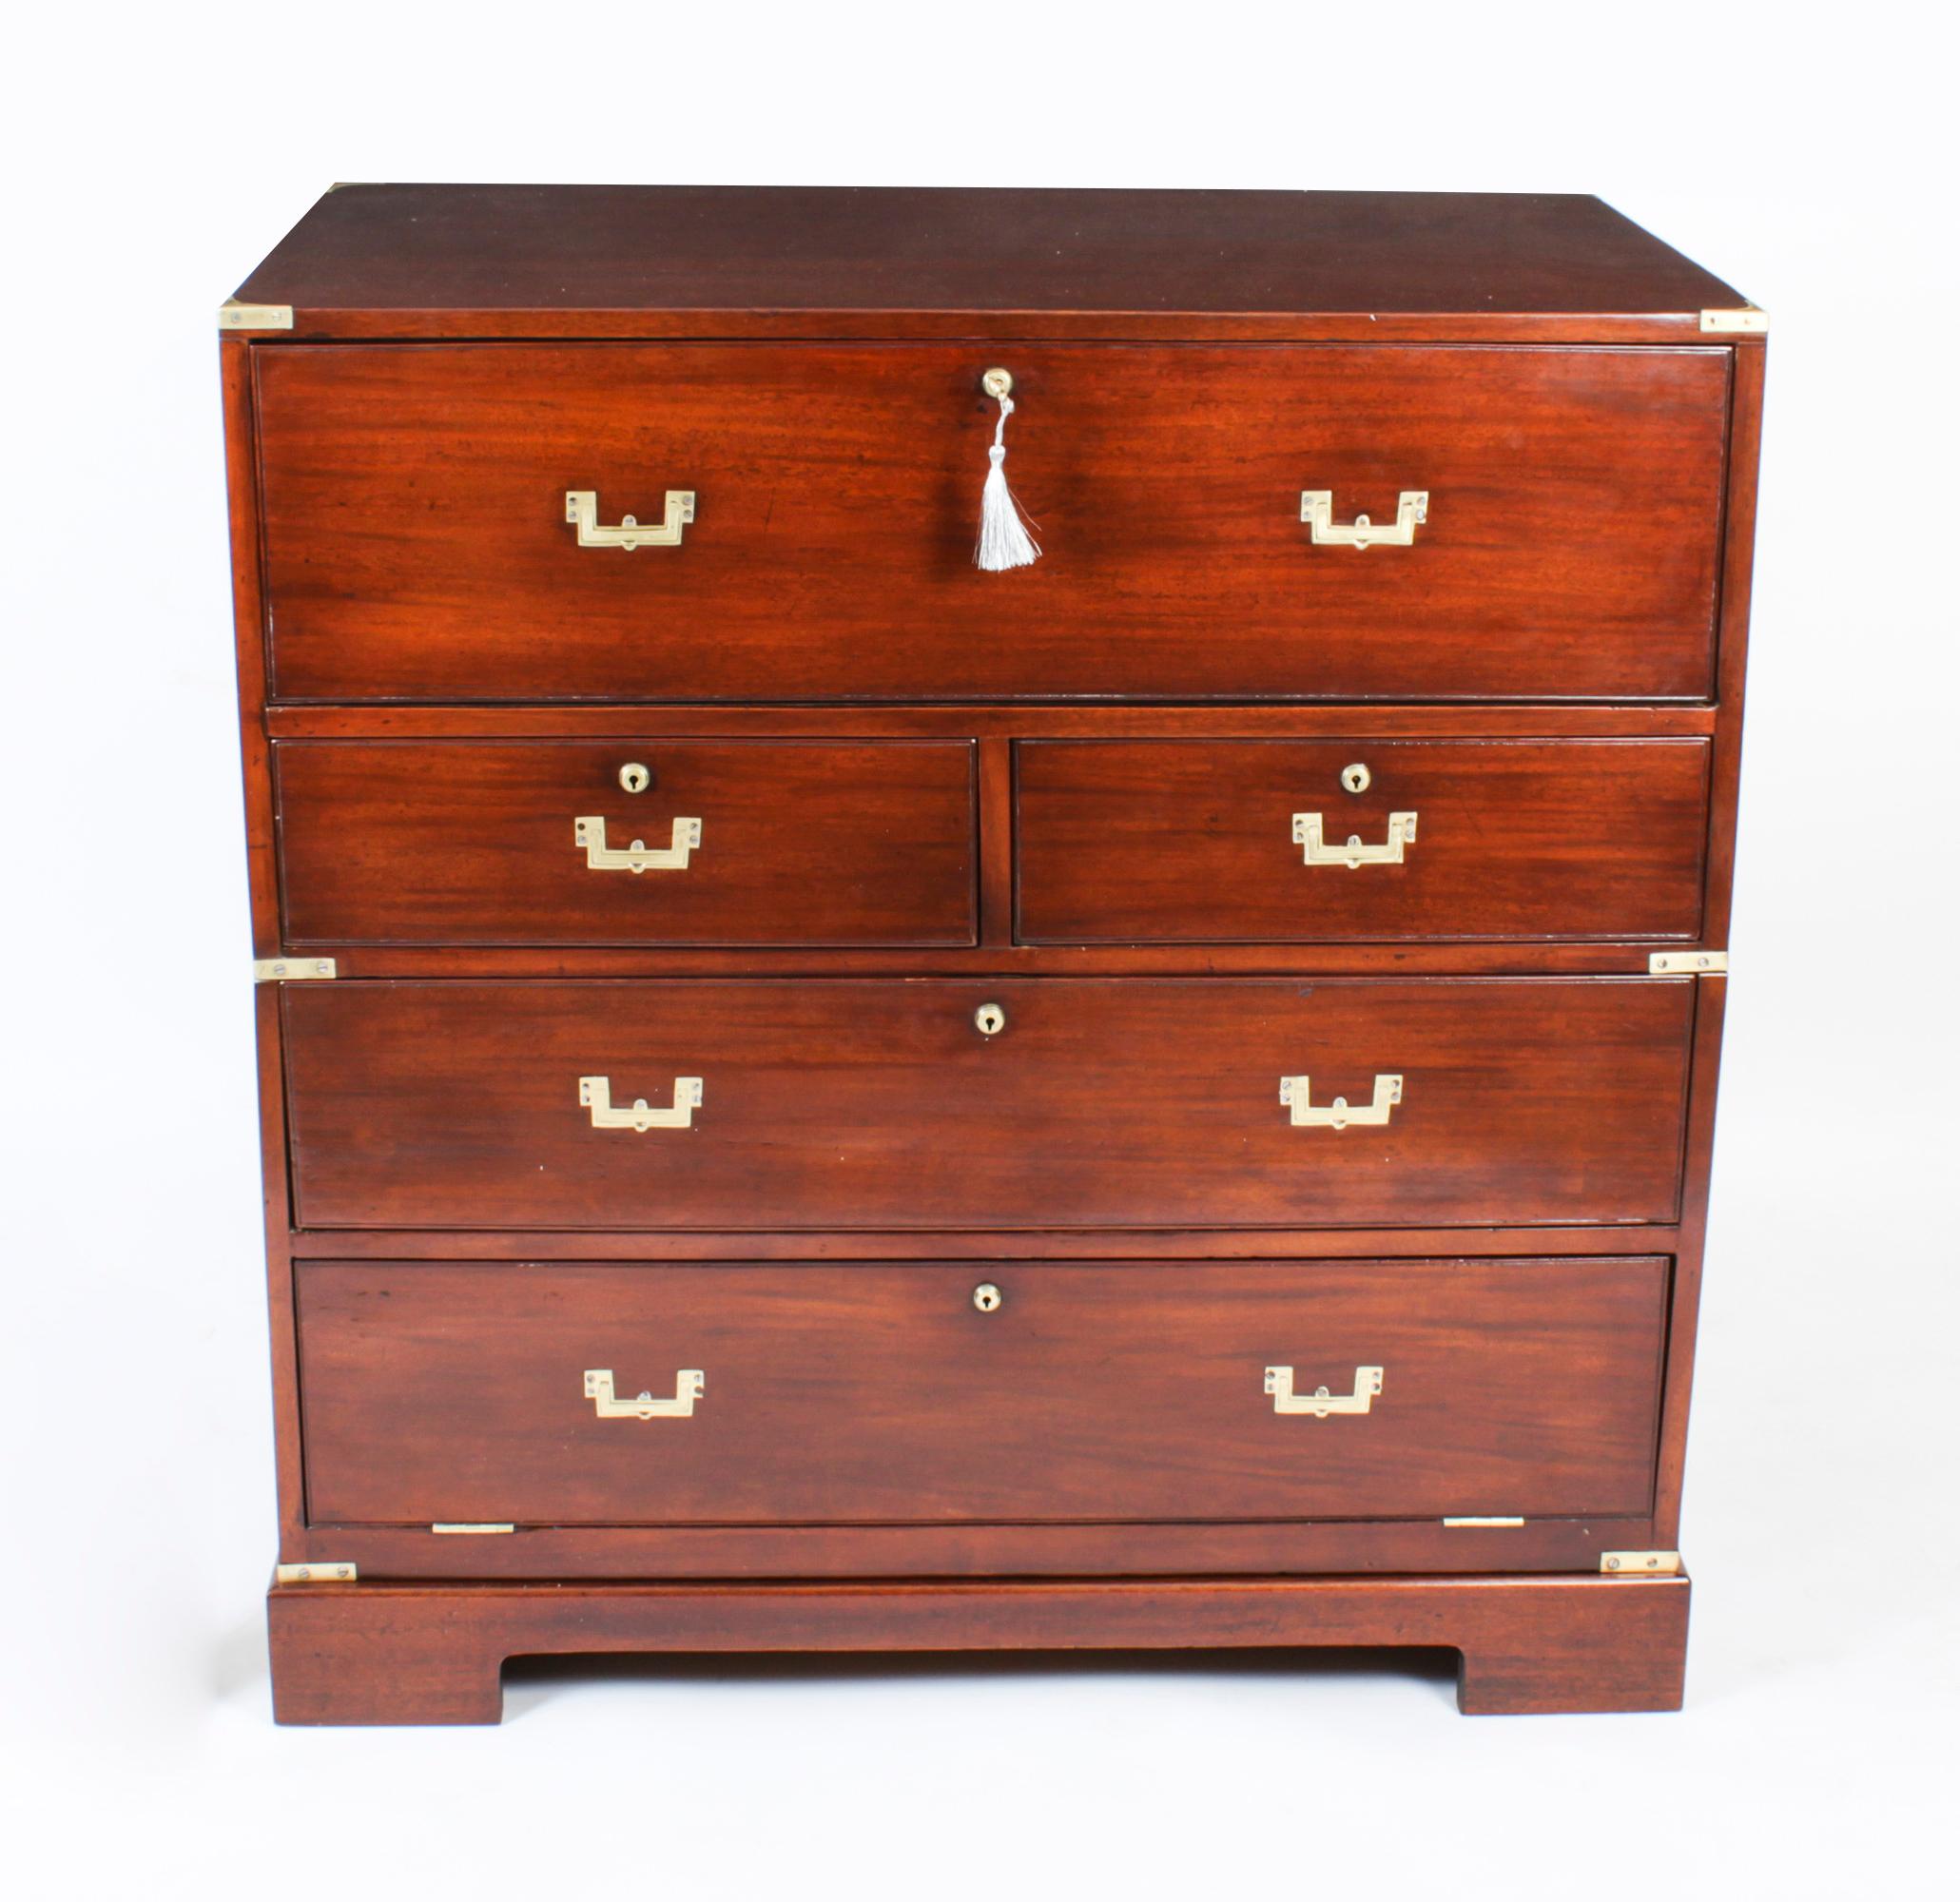 This is beautifully crafted antique early Victorian teak military secretaire chest of drawers, circa 1840 in date.
 
The top drawer opening to a pull out secretary desk with small drawers and compartments, over two short drawers over three long